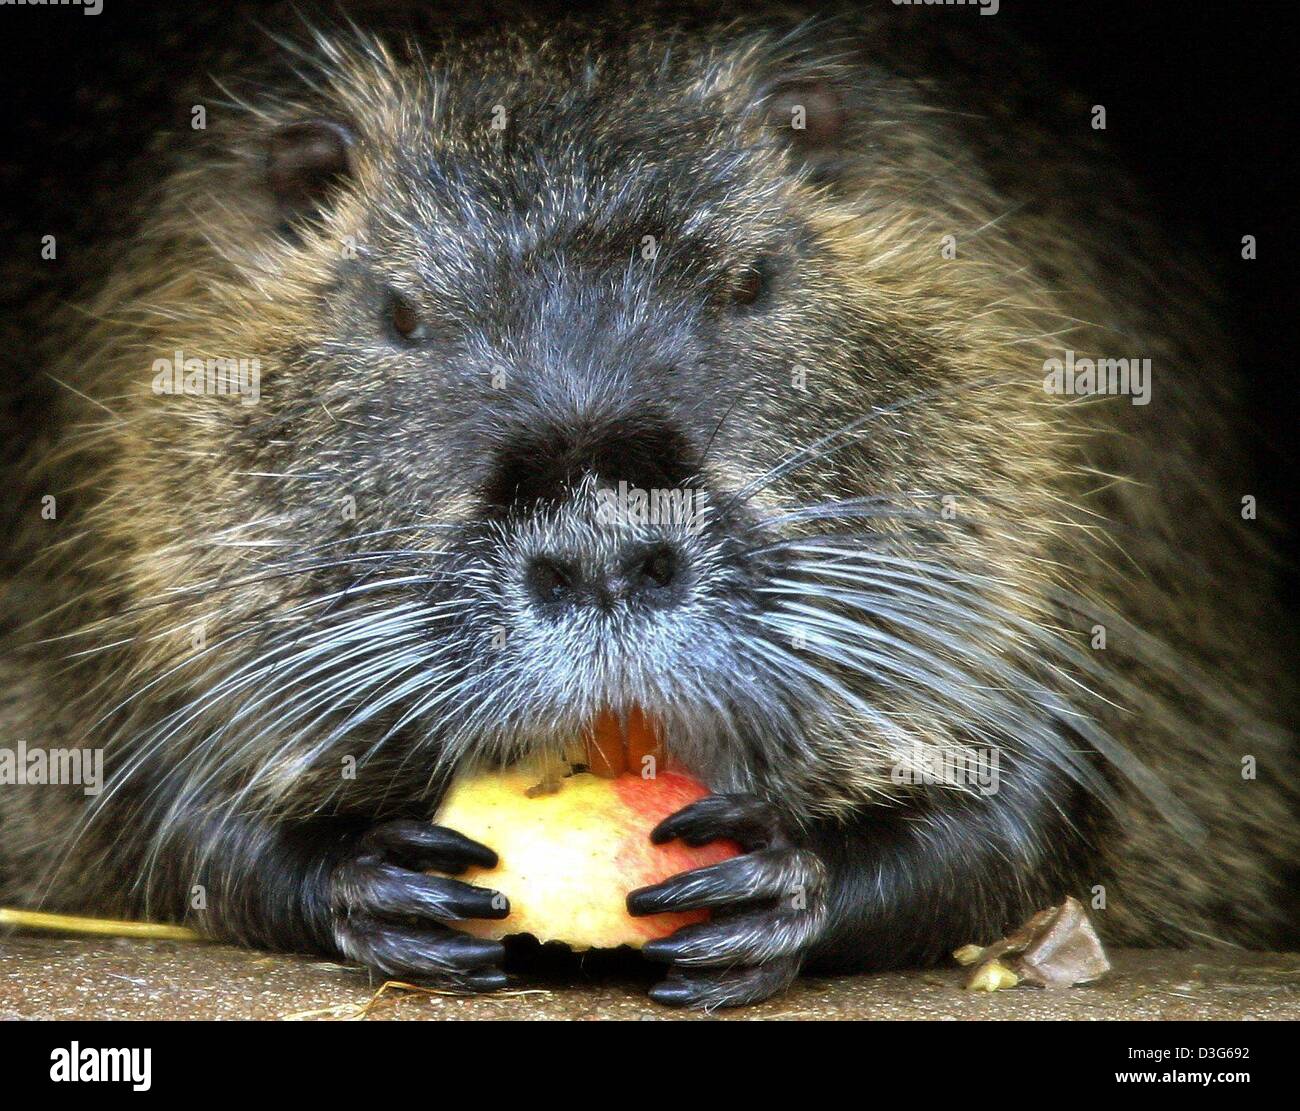 (dpa) - A nutria munches on an apple in the zoo in Hof, Germany, 13 November 2003. Nutrias are large rodents nearly the size of a beaver but with rounded, ratlike tails. Throughout much of their natural range in South America, nutria prefer a semiaquatic existence in swamps, marshes, and along the shores of rivers and lakes. Stock Photo